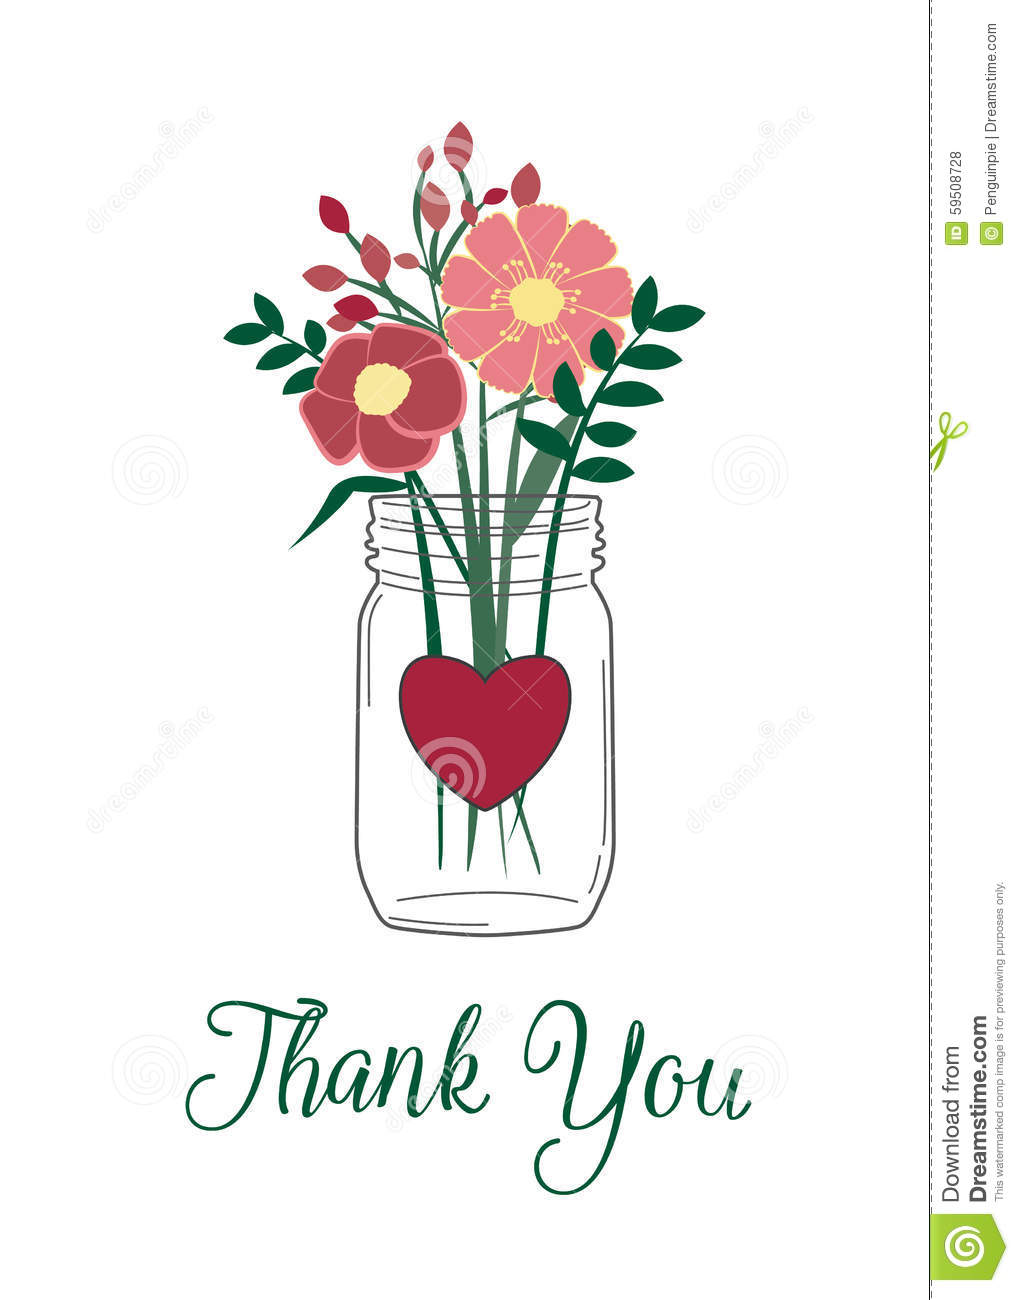 Thank you clipart with flowers